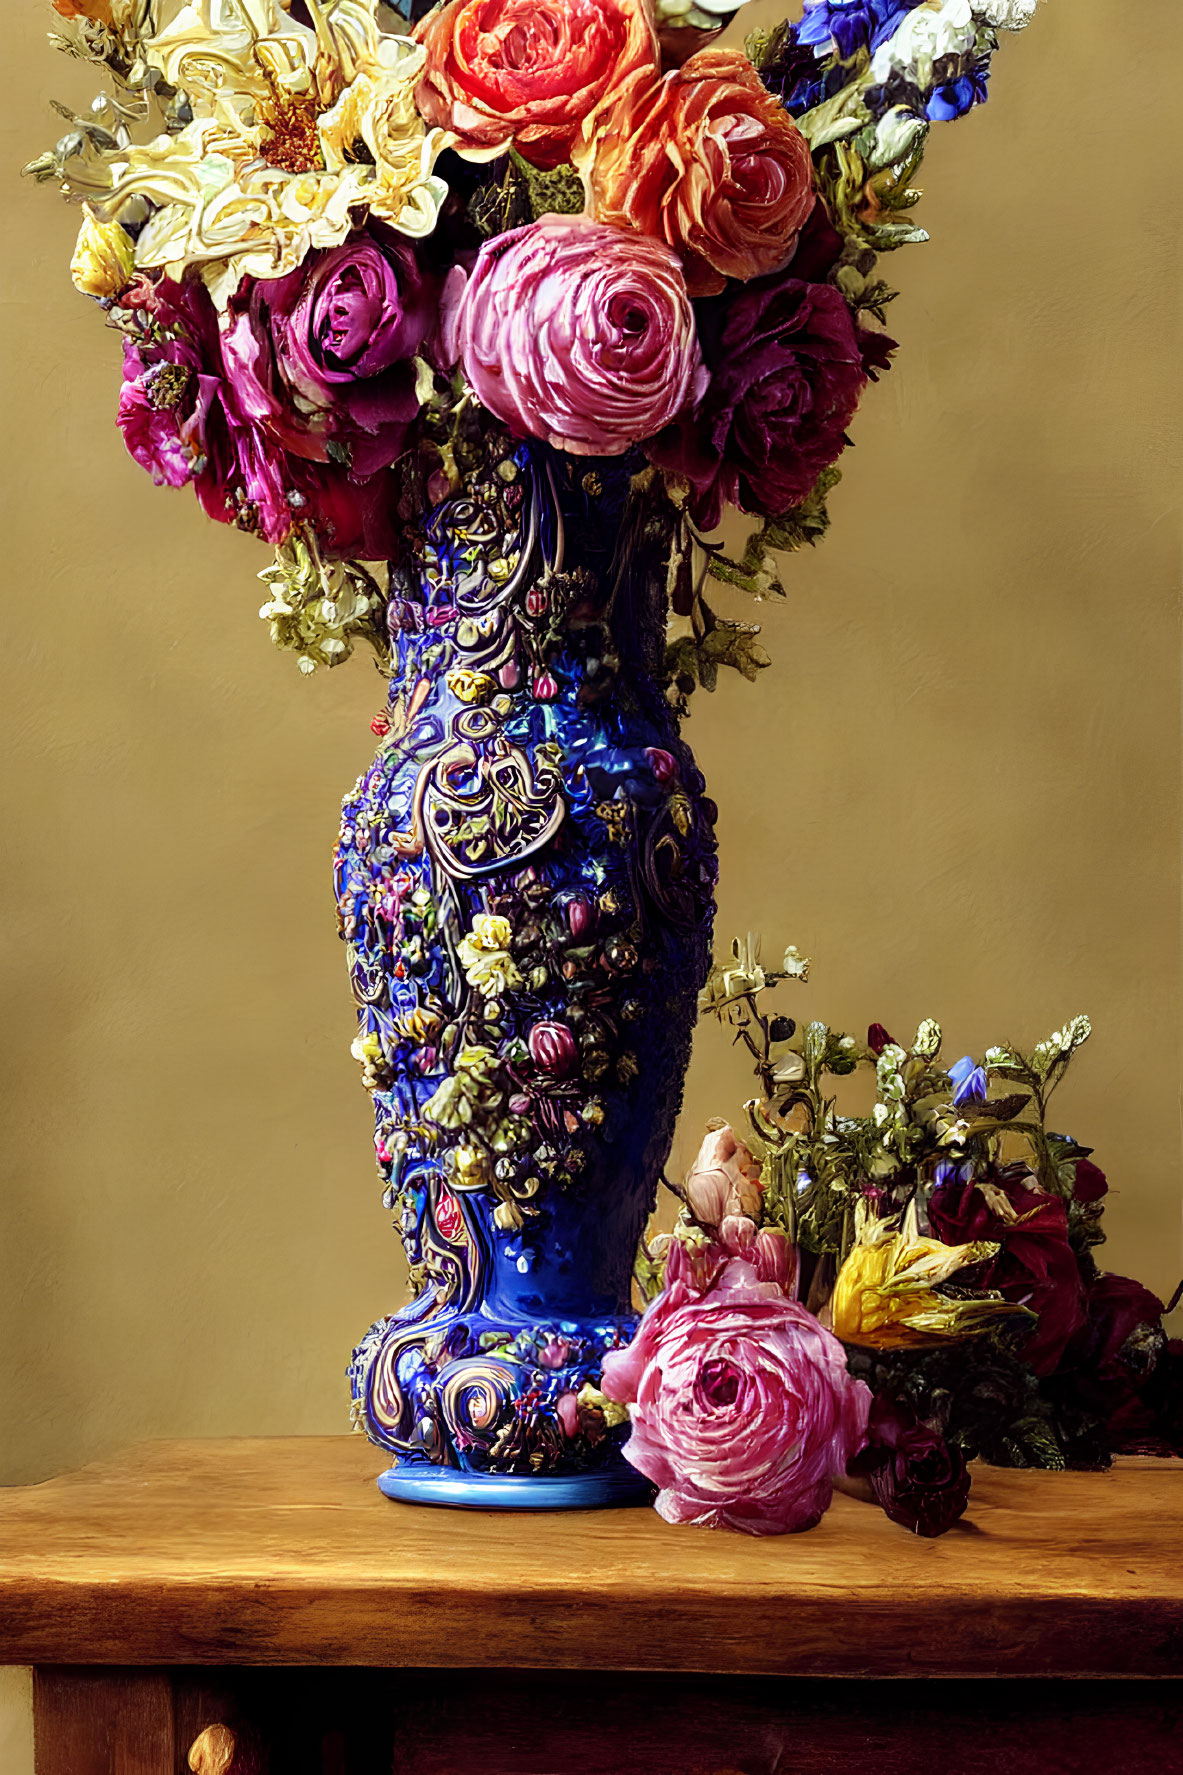 Blue Vase with Gold Patterns and Colorful Roses on Warm Background